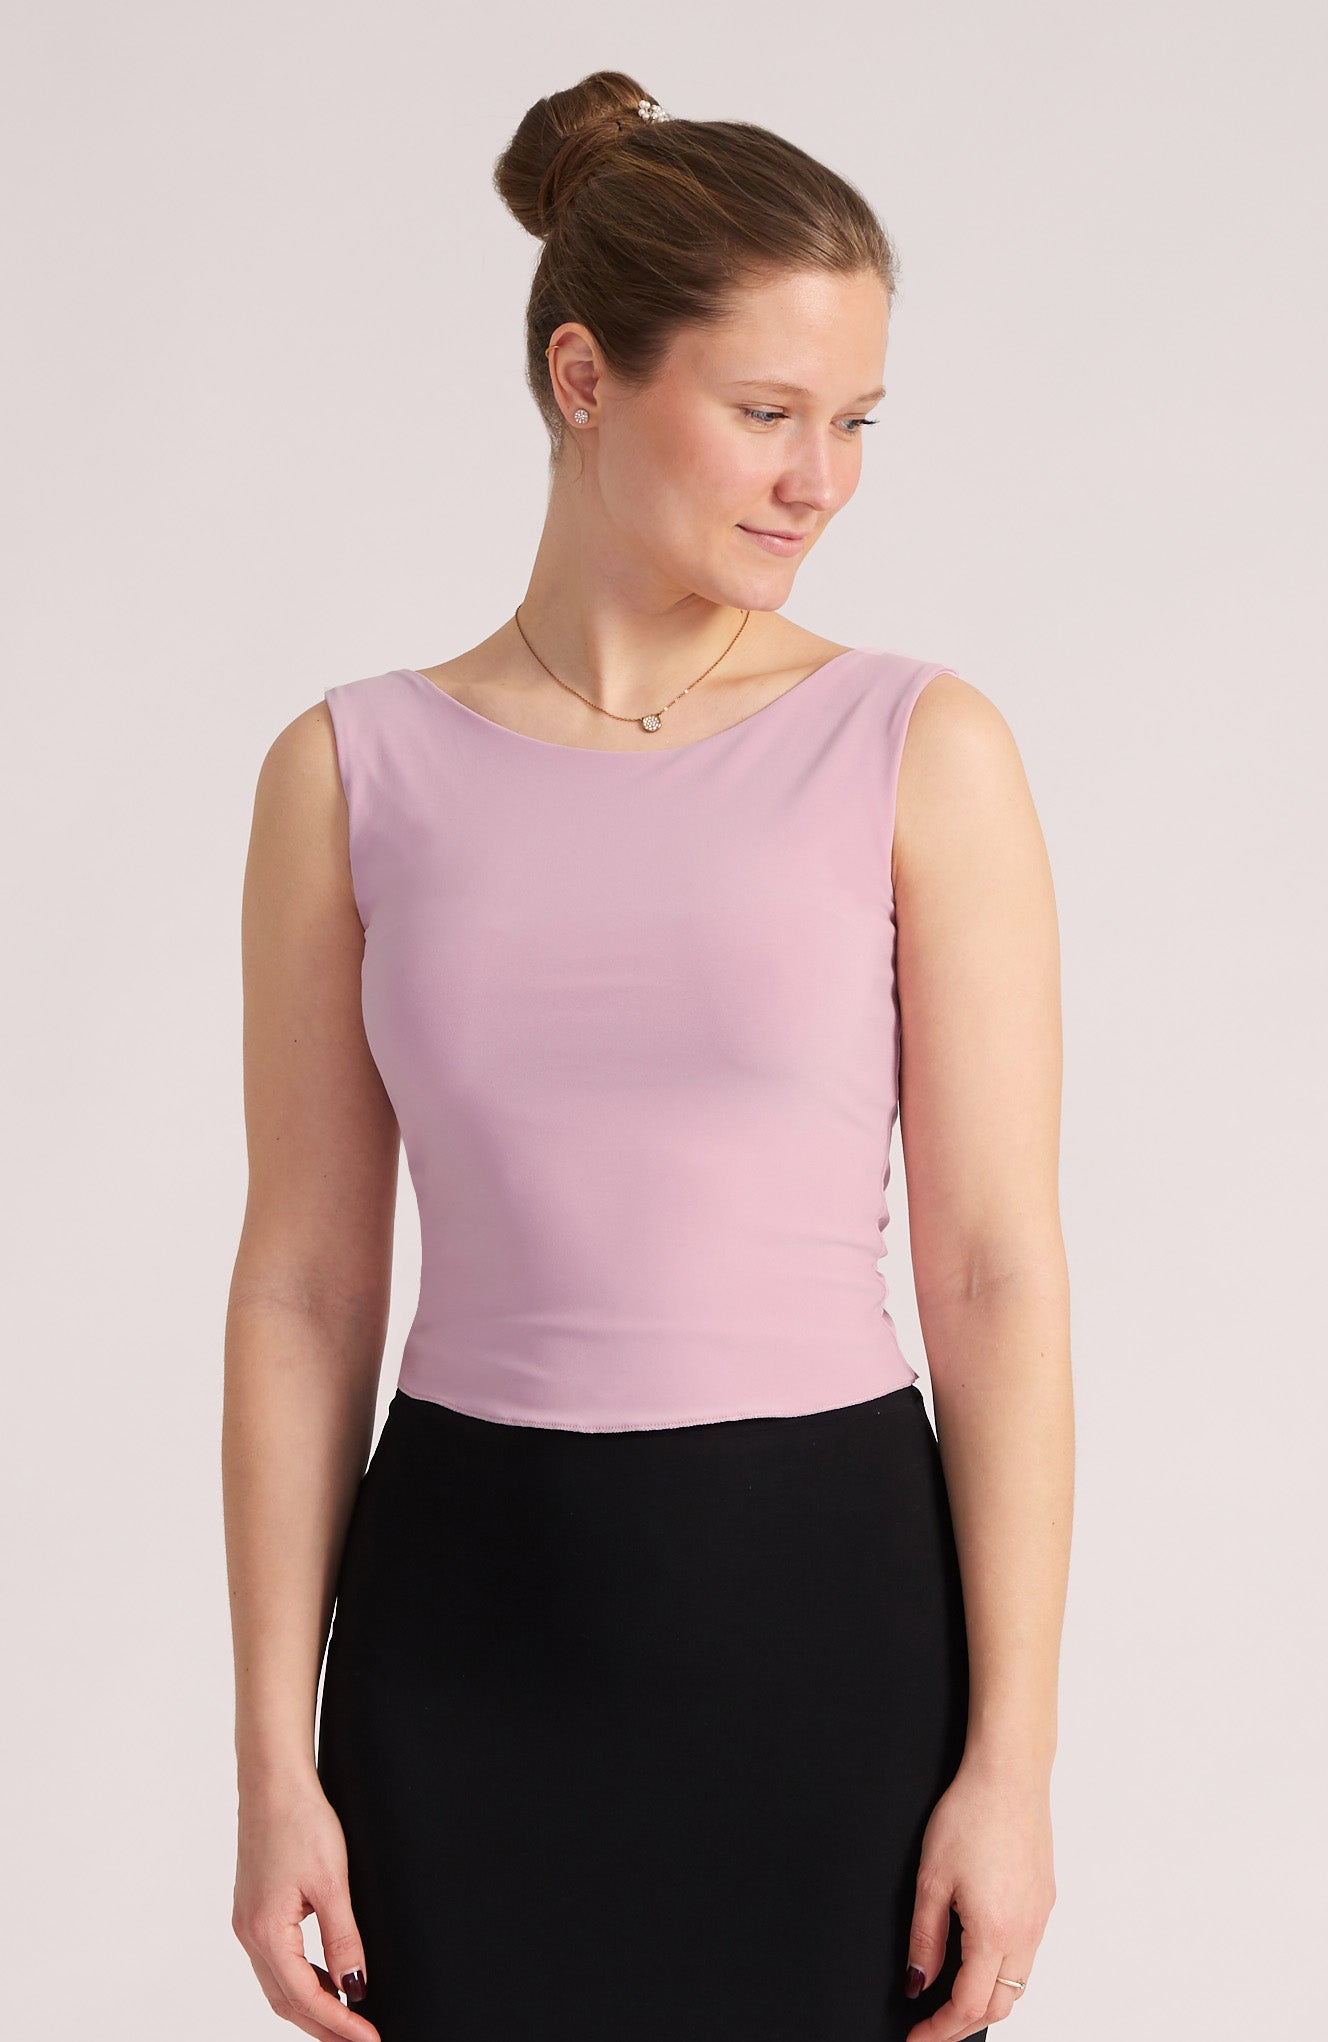 DORA - Draped Top in Soft Pink